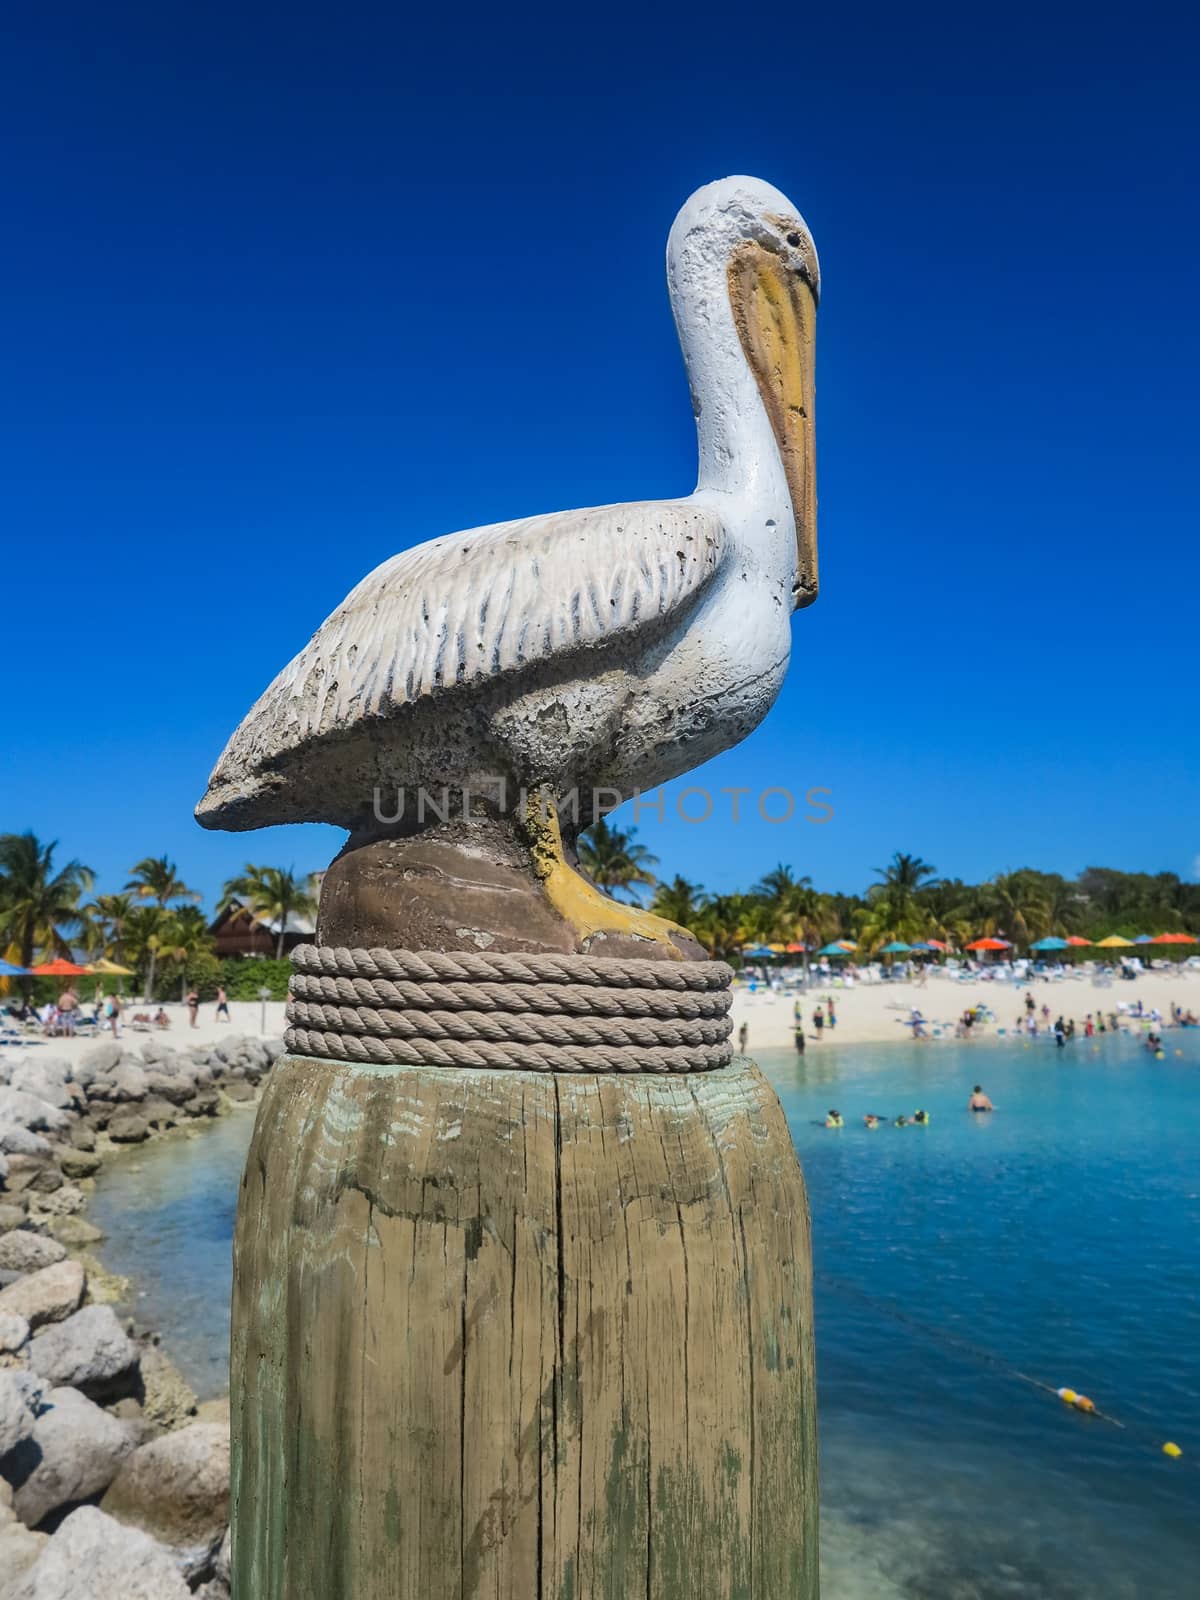 A pelican statue by the beach and ocean